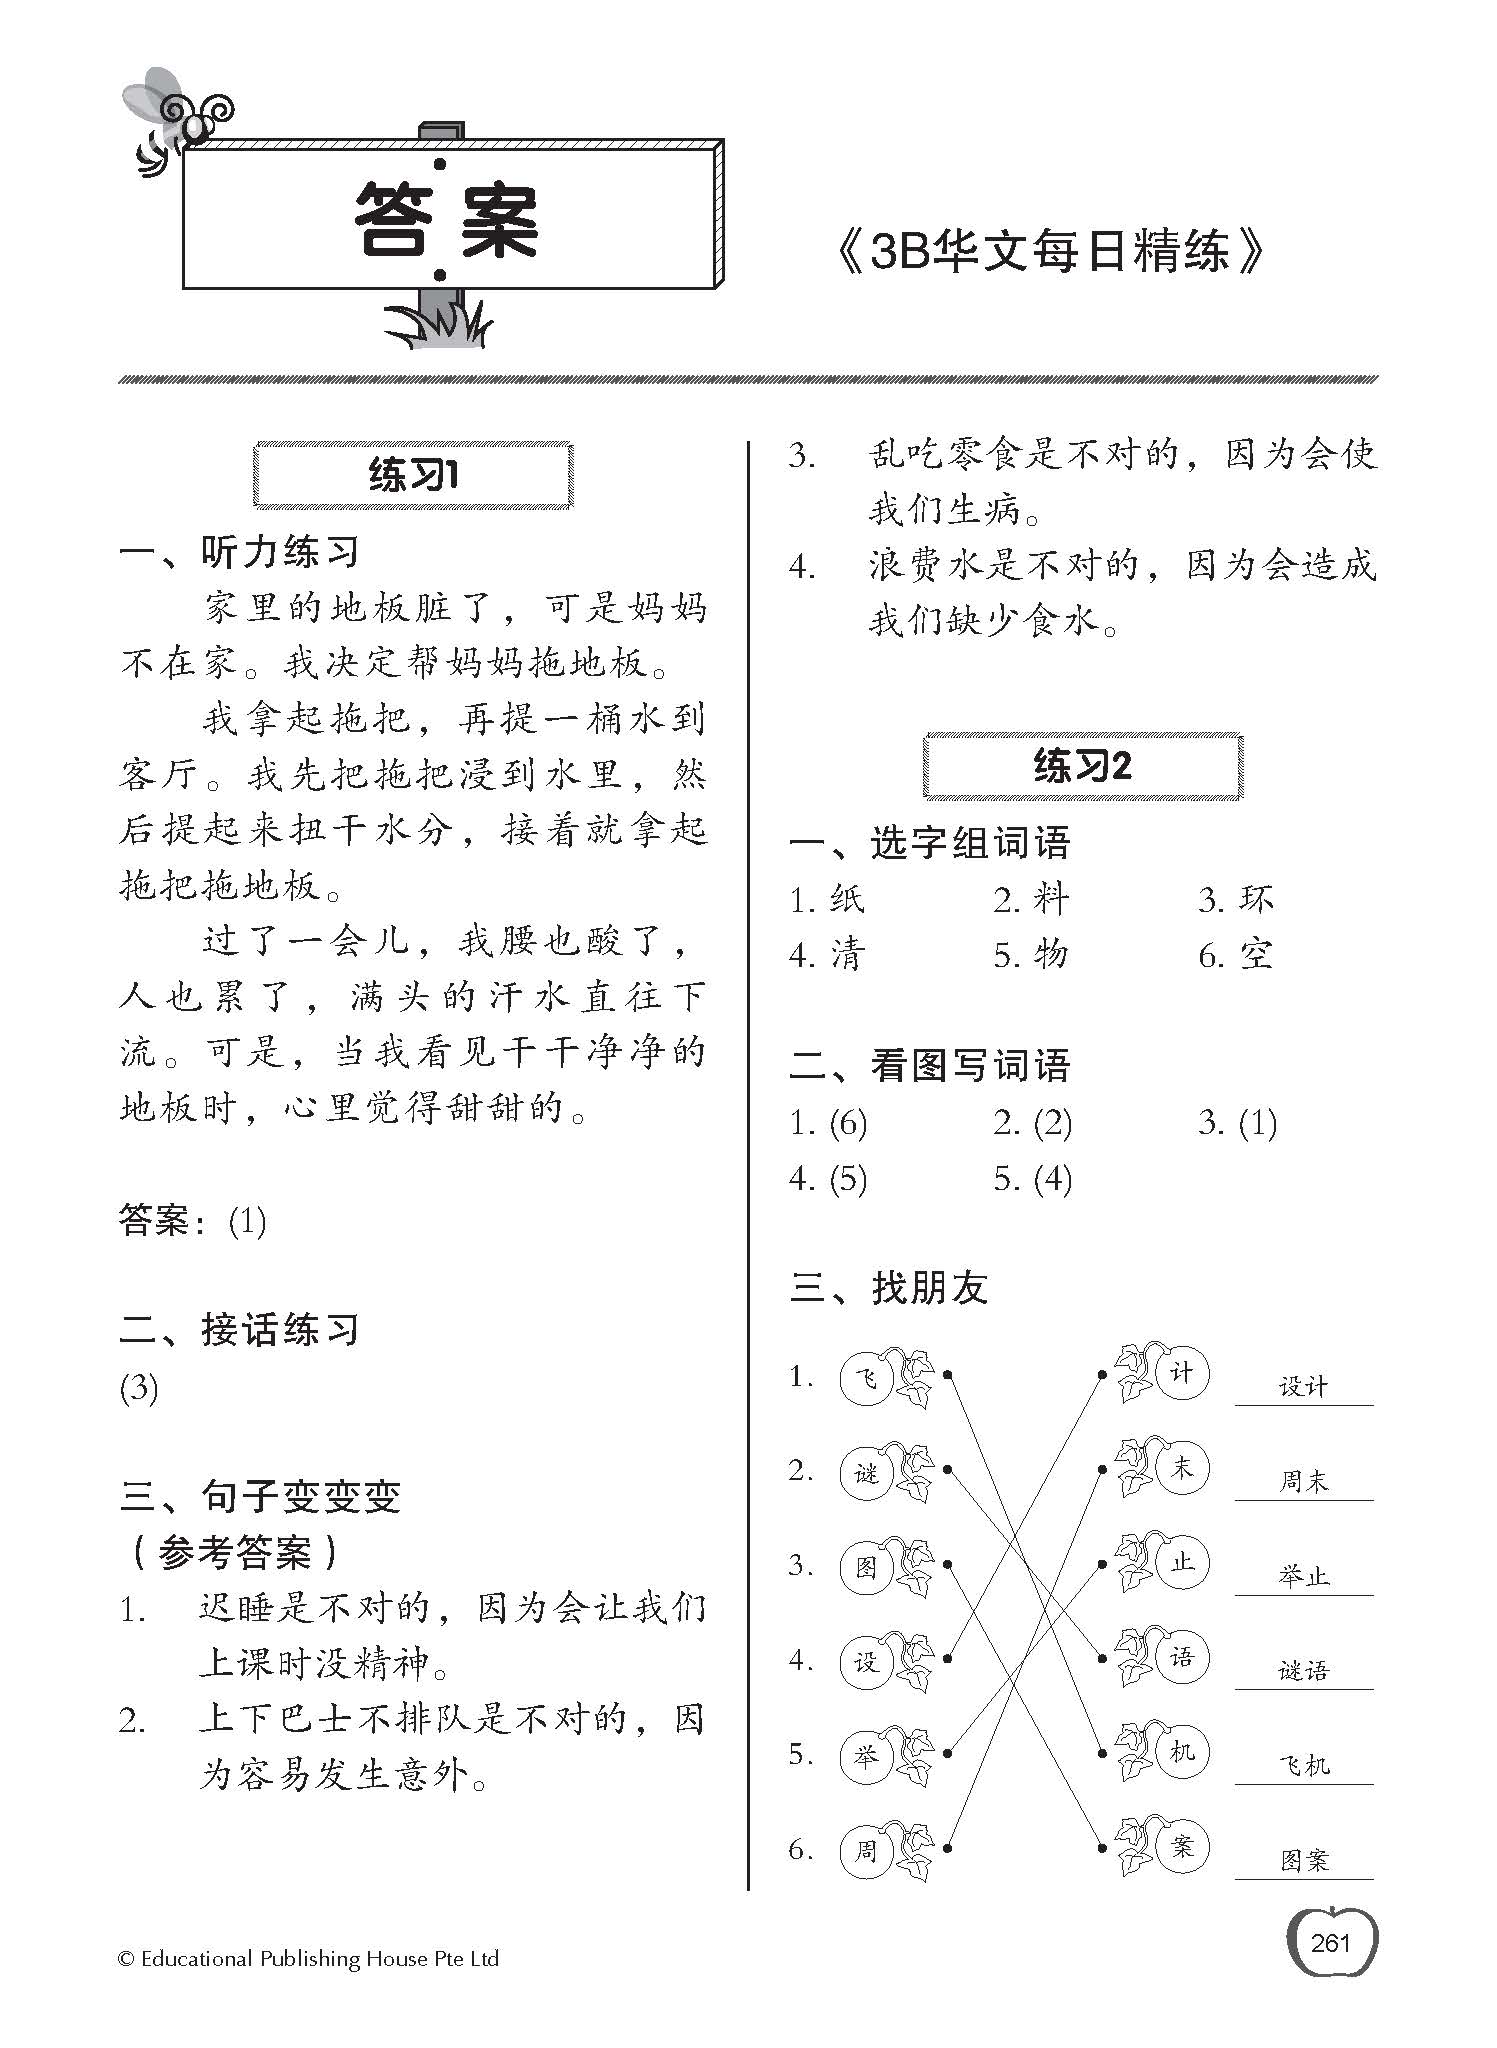 Primary 3B Chinese Daily Intensive Practice 华文每日精练 - _MS, CHALLENGING, CHINESE, EDUCATIONAL PUBLISHING HOUSE, PRIMARY 3